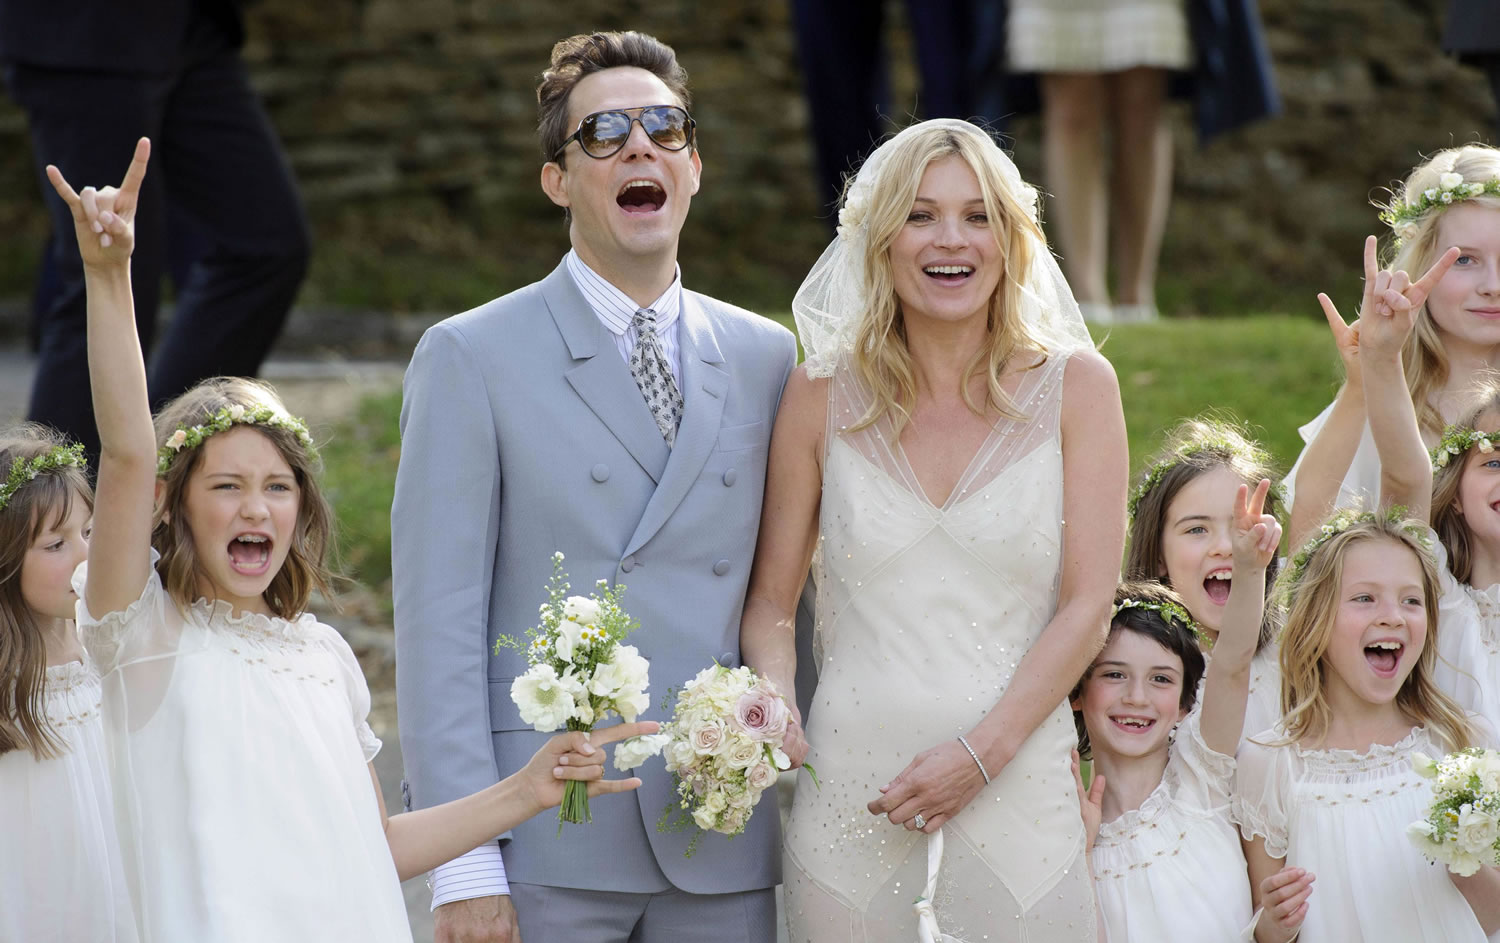 Assocaited Press files
British model Kate Moss and British guitarist Jamie Hince pose for photos with bridesmaids after their July 2011 wedding in Southrop, England.